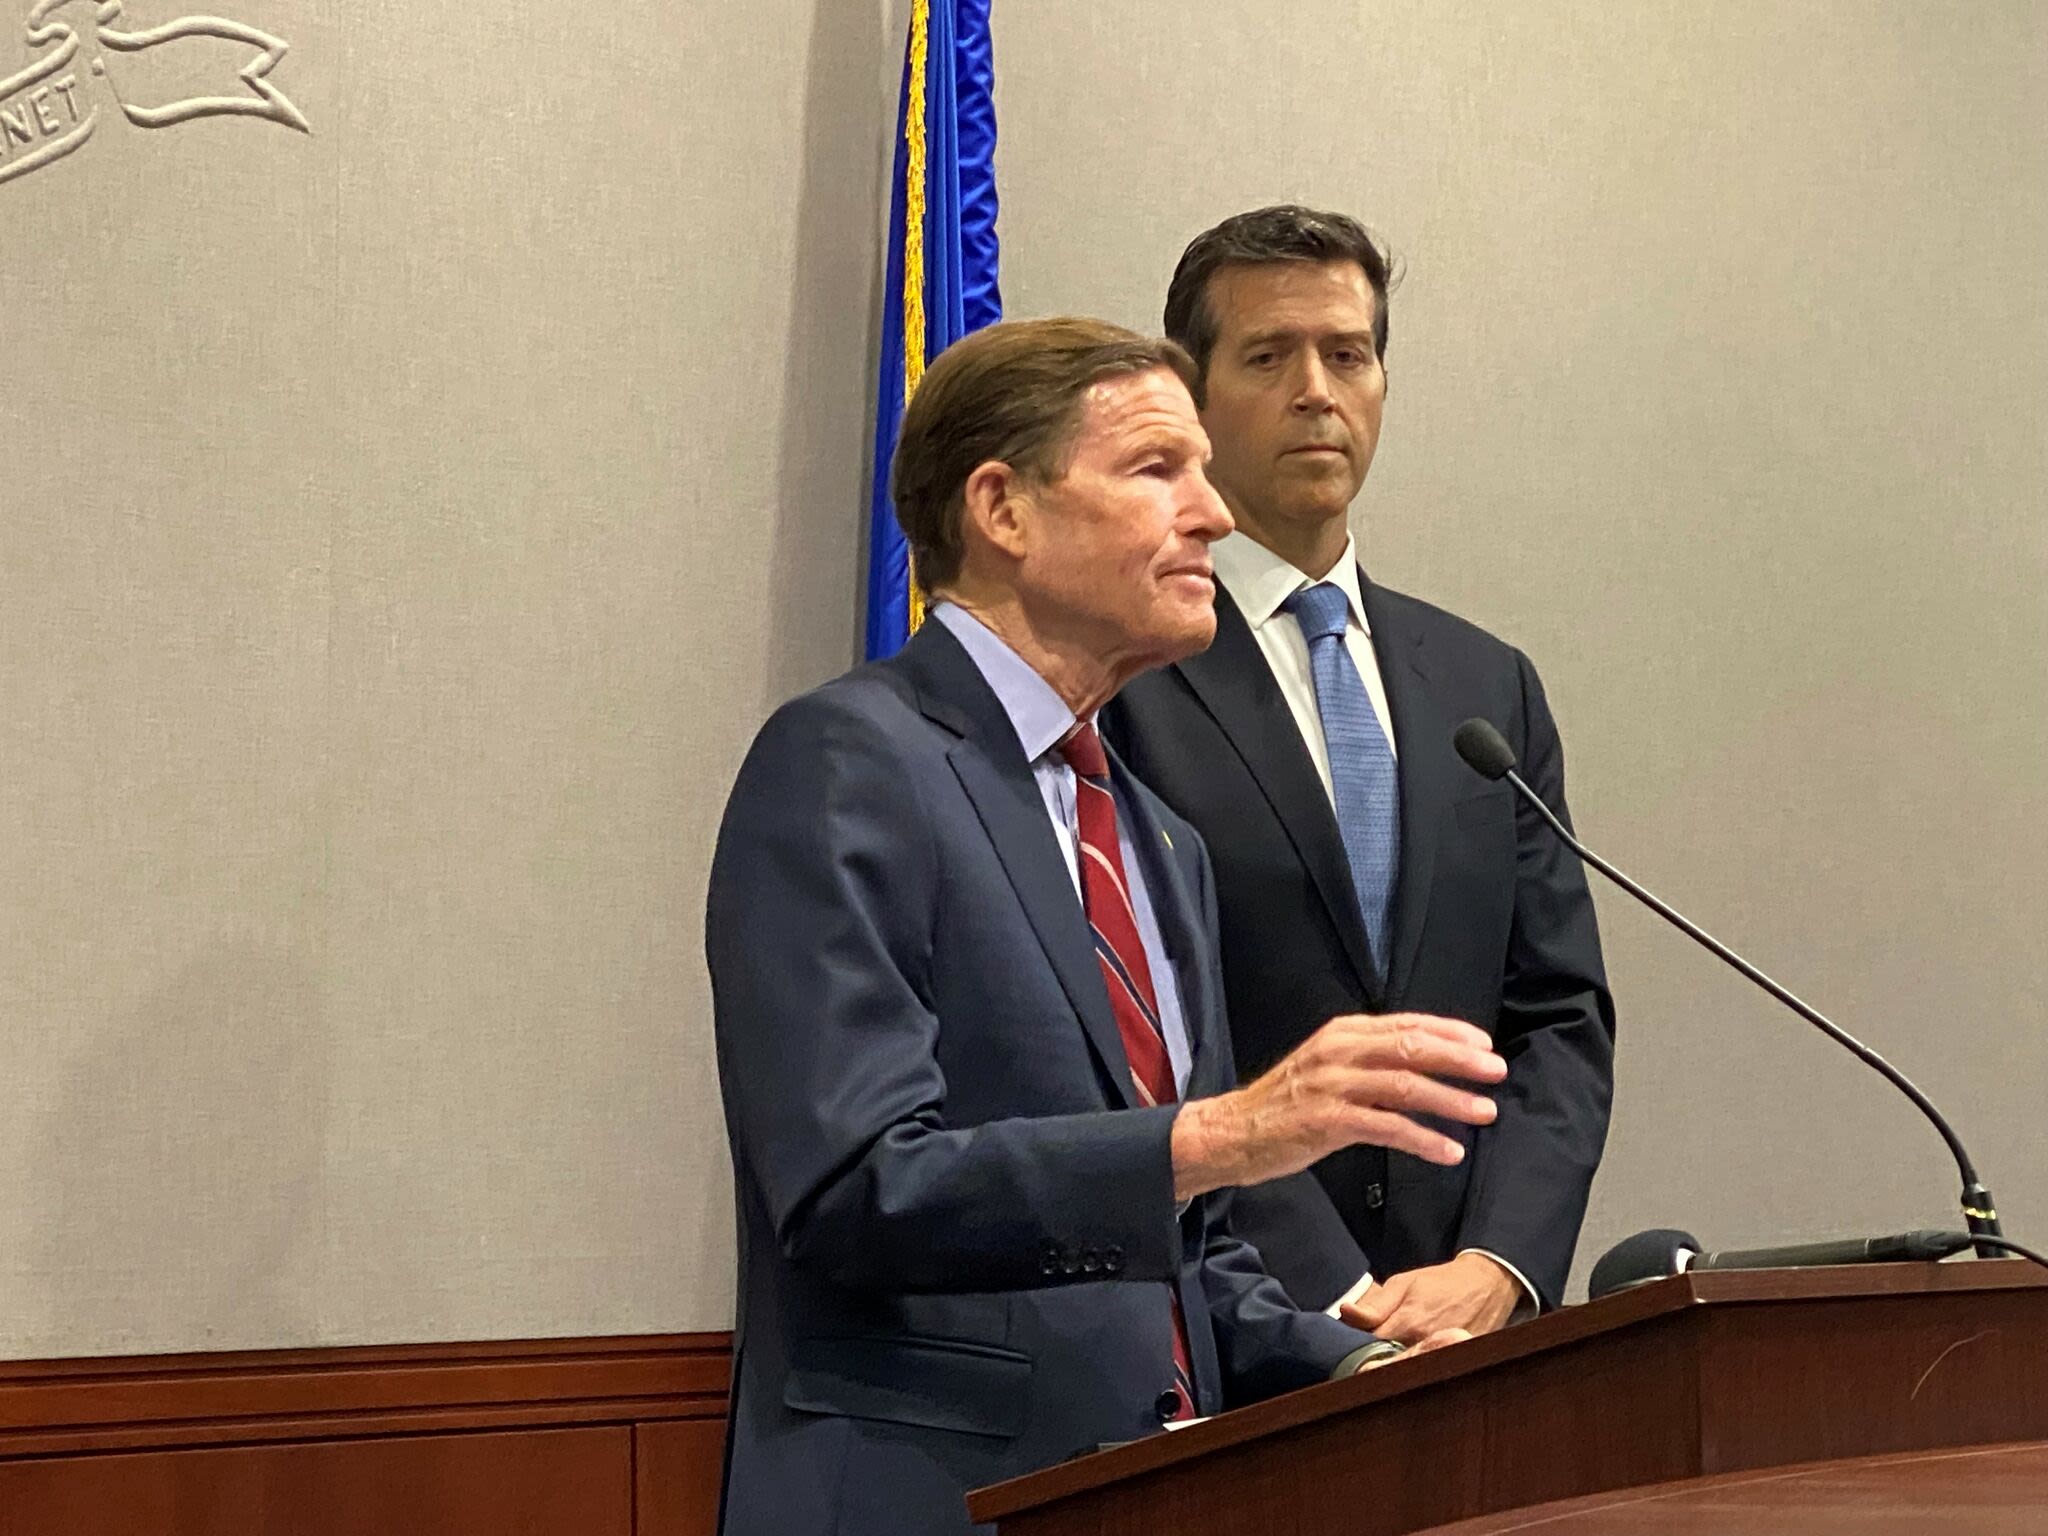 Consumer Protection, Blumenthal warn CT residents of peer-to-peer payment scams in apps like Zelle